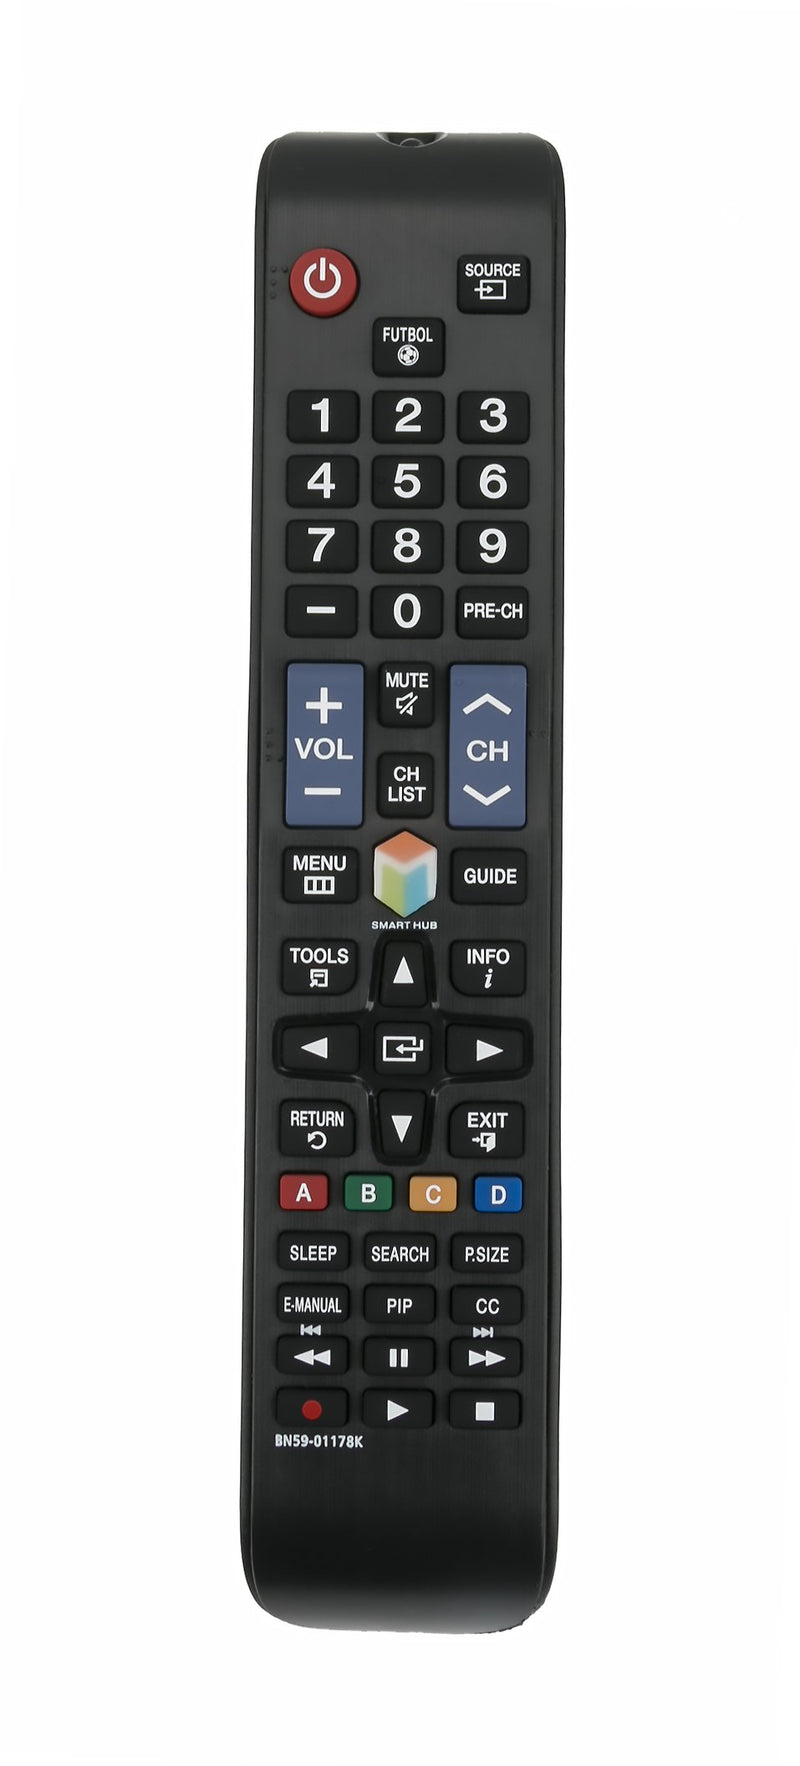 New BN59-01178K Replaced Remote fit for SAMSUNG LED TV UN32H4303AH UN55H6103AF UN55H6103AFXZP UN55ES6100 4253 Series 5153 Series 5103 Series 4304 Series 6103 Series 6153 Series 6203 Series 4353 Series